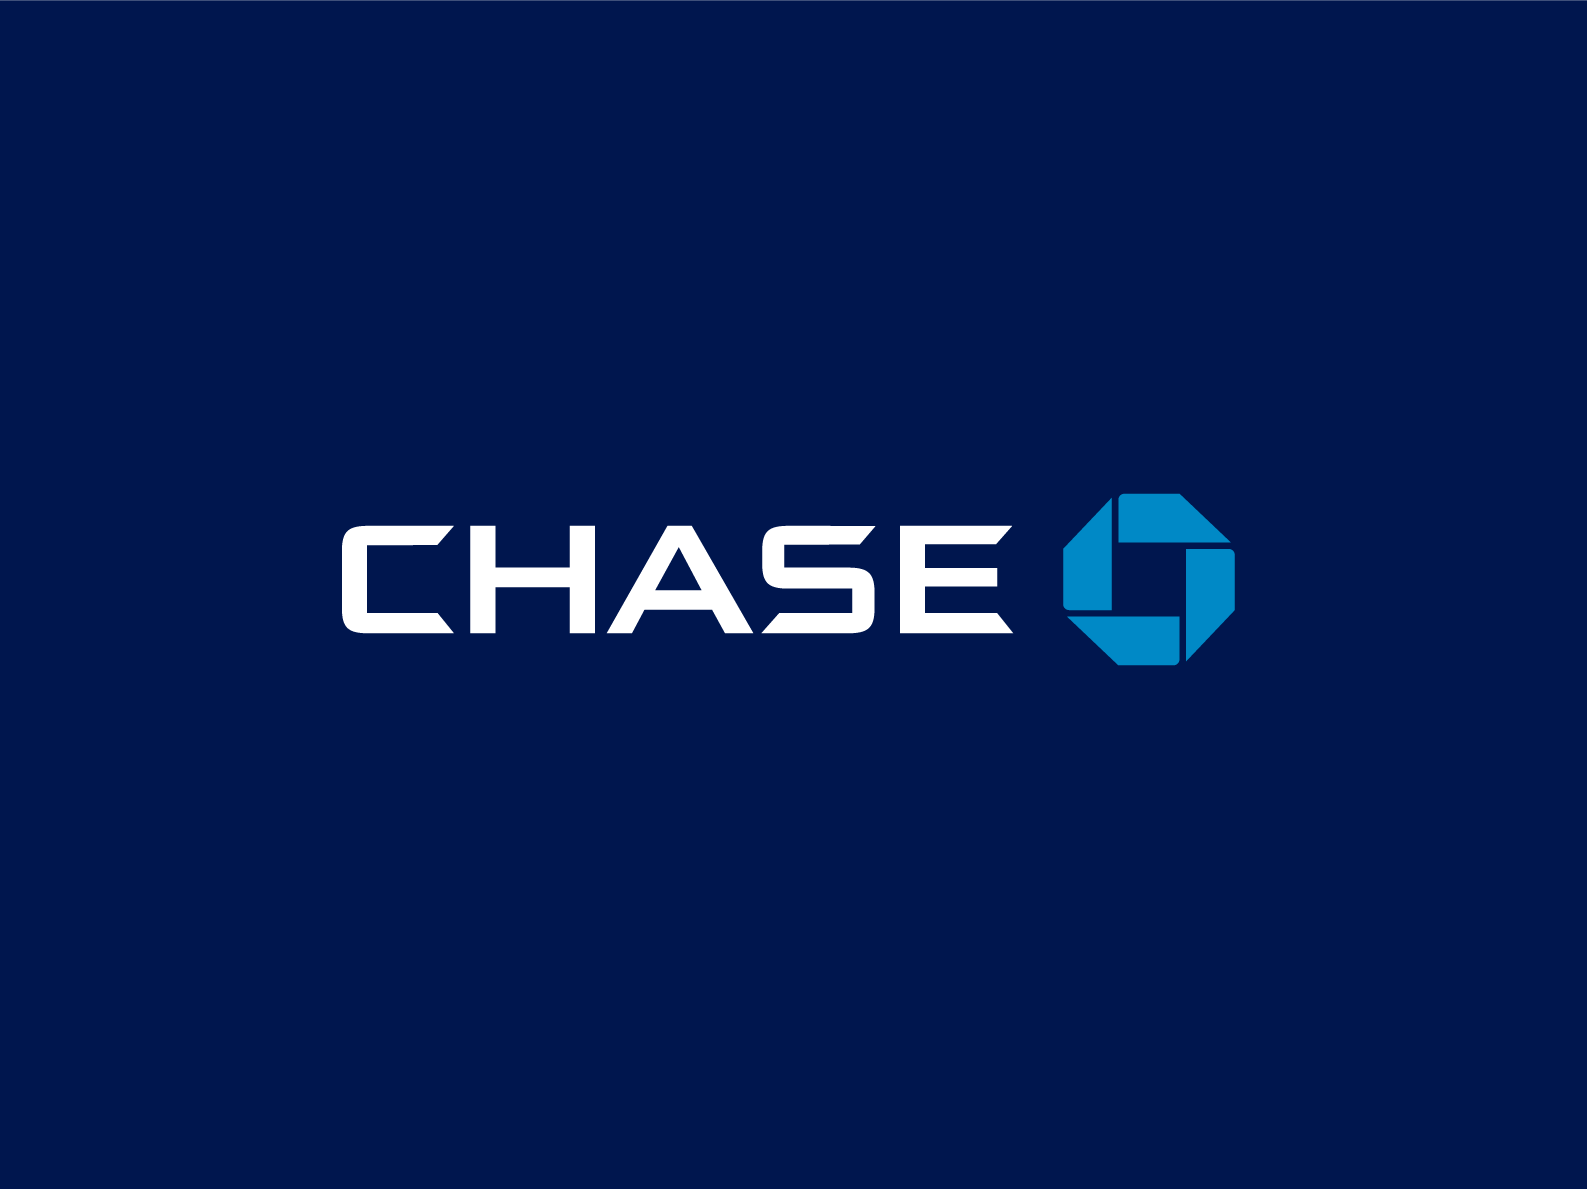 195 Chase icon images at Vectorified.com